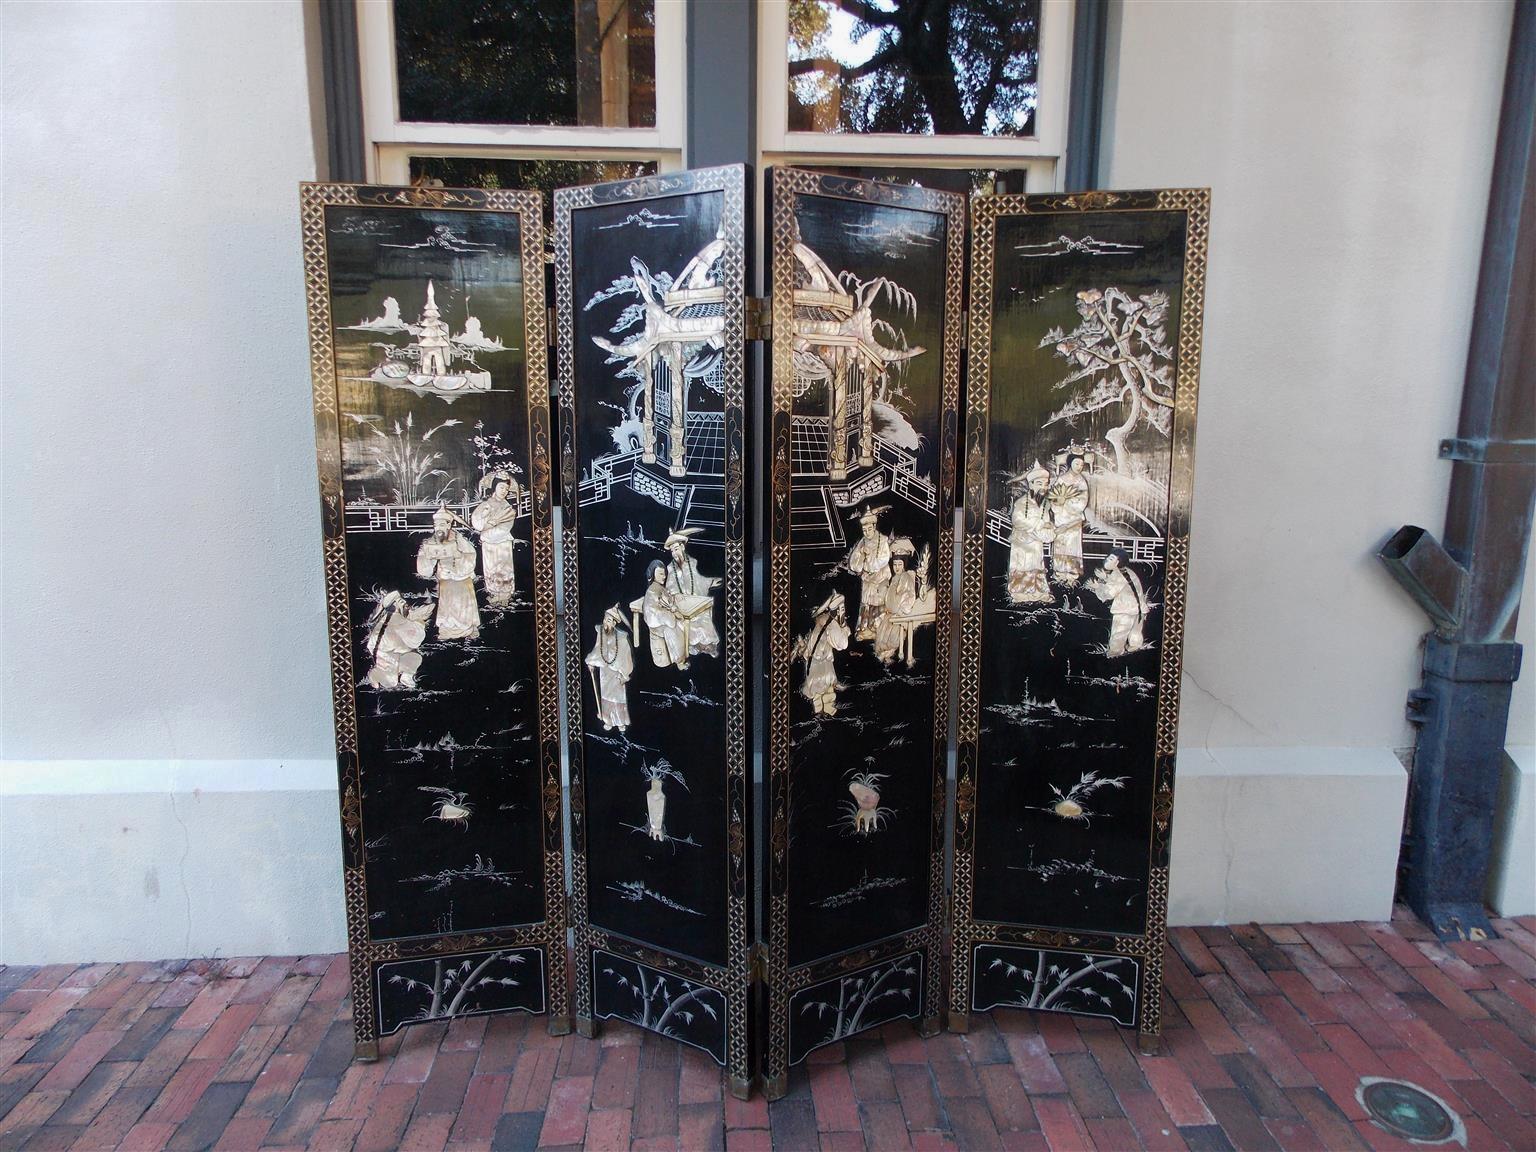 Chinese Coromandel figural black lacquer, soap stone, mother-of-pearl, and bone four-panel screen depicting pagoda and landscape scenes, decorative painted and gilt upper border panels, painted and gilt floral lower border panels, and reverse side